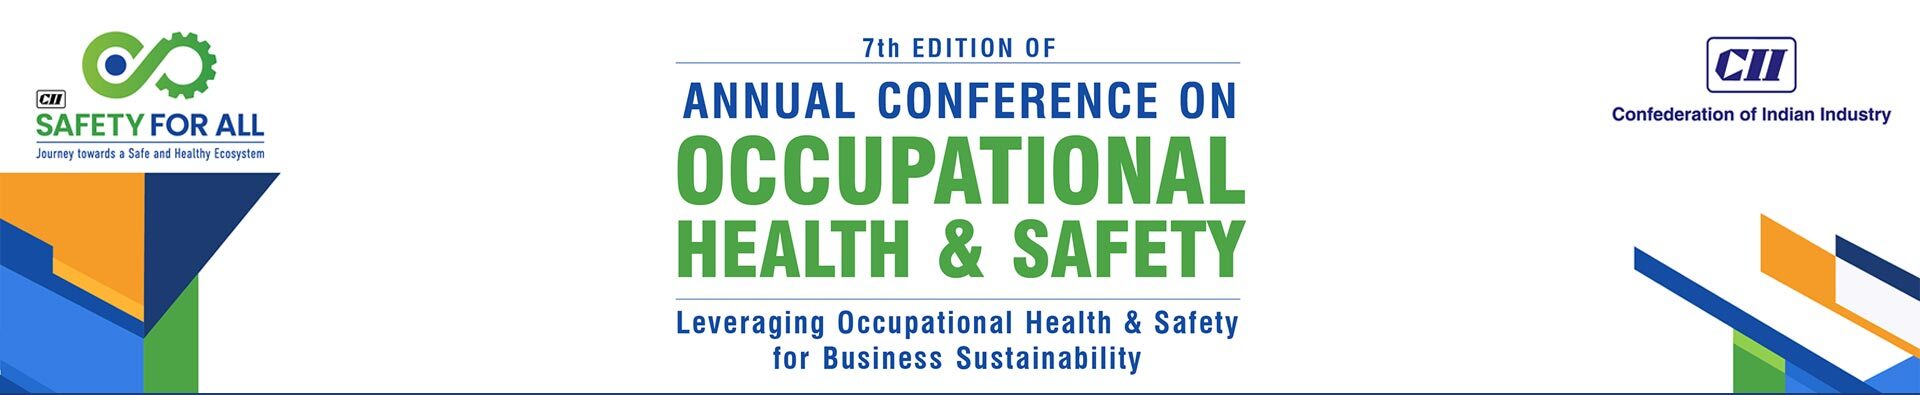 7th Edition on Annual Conference on Occupational Health & Safety